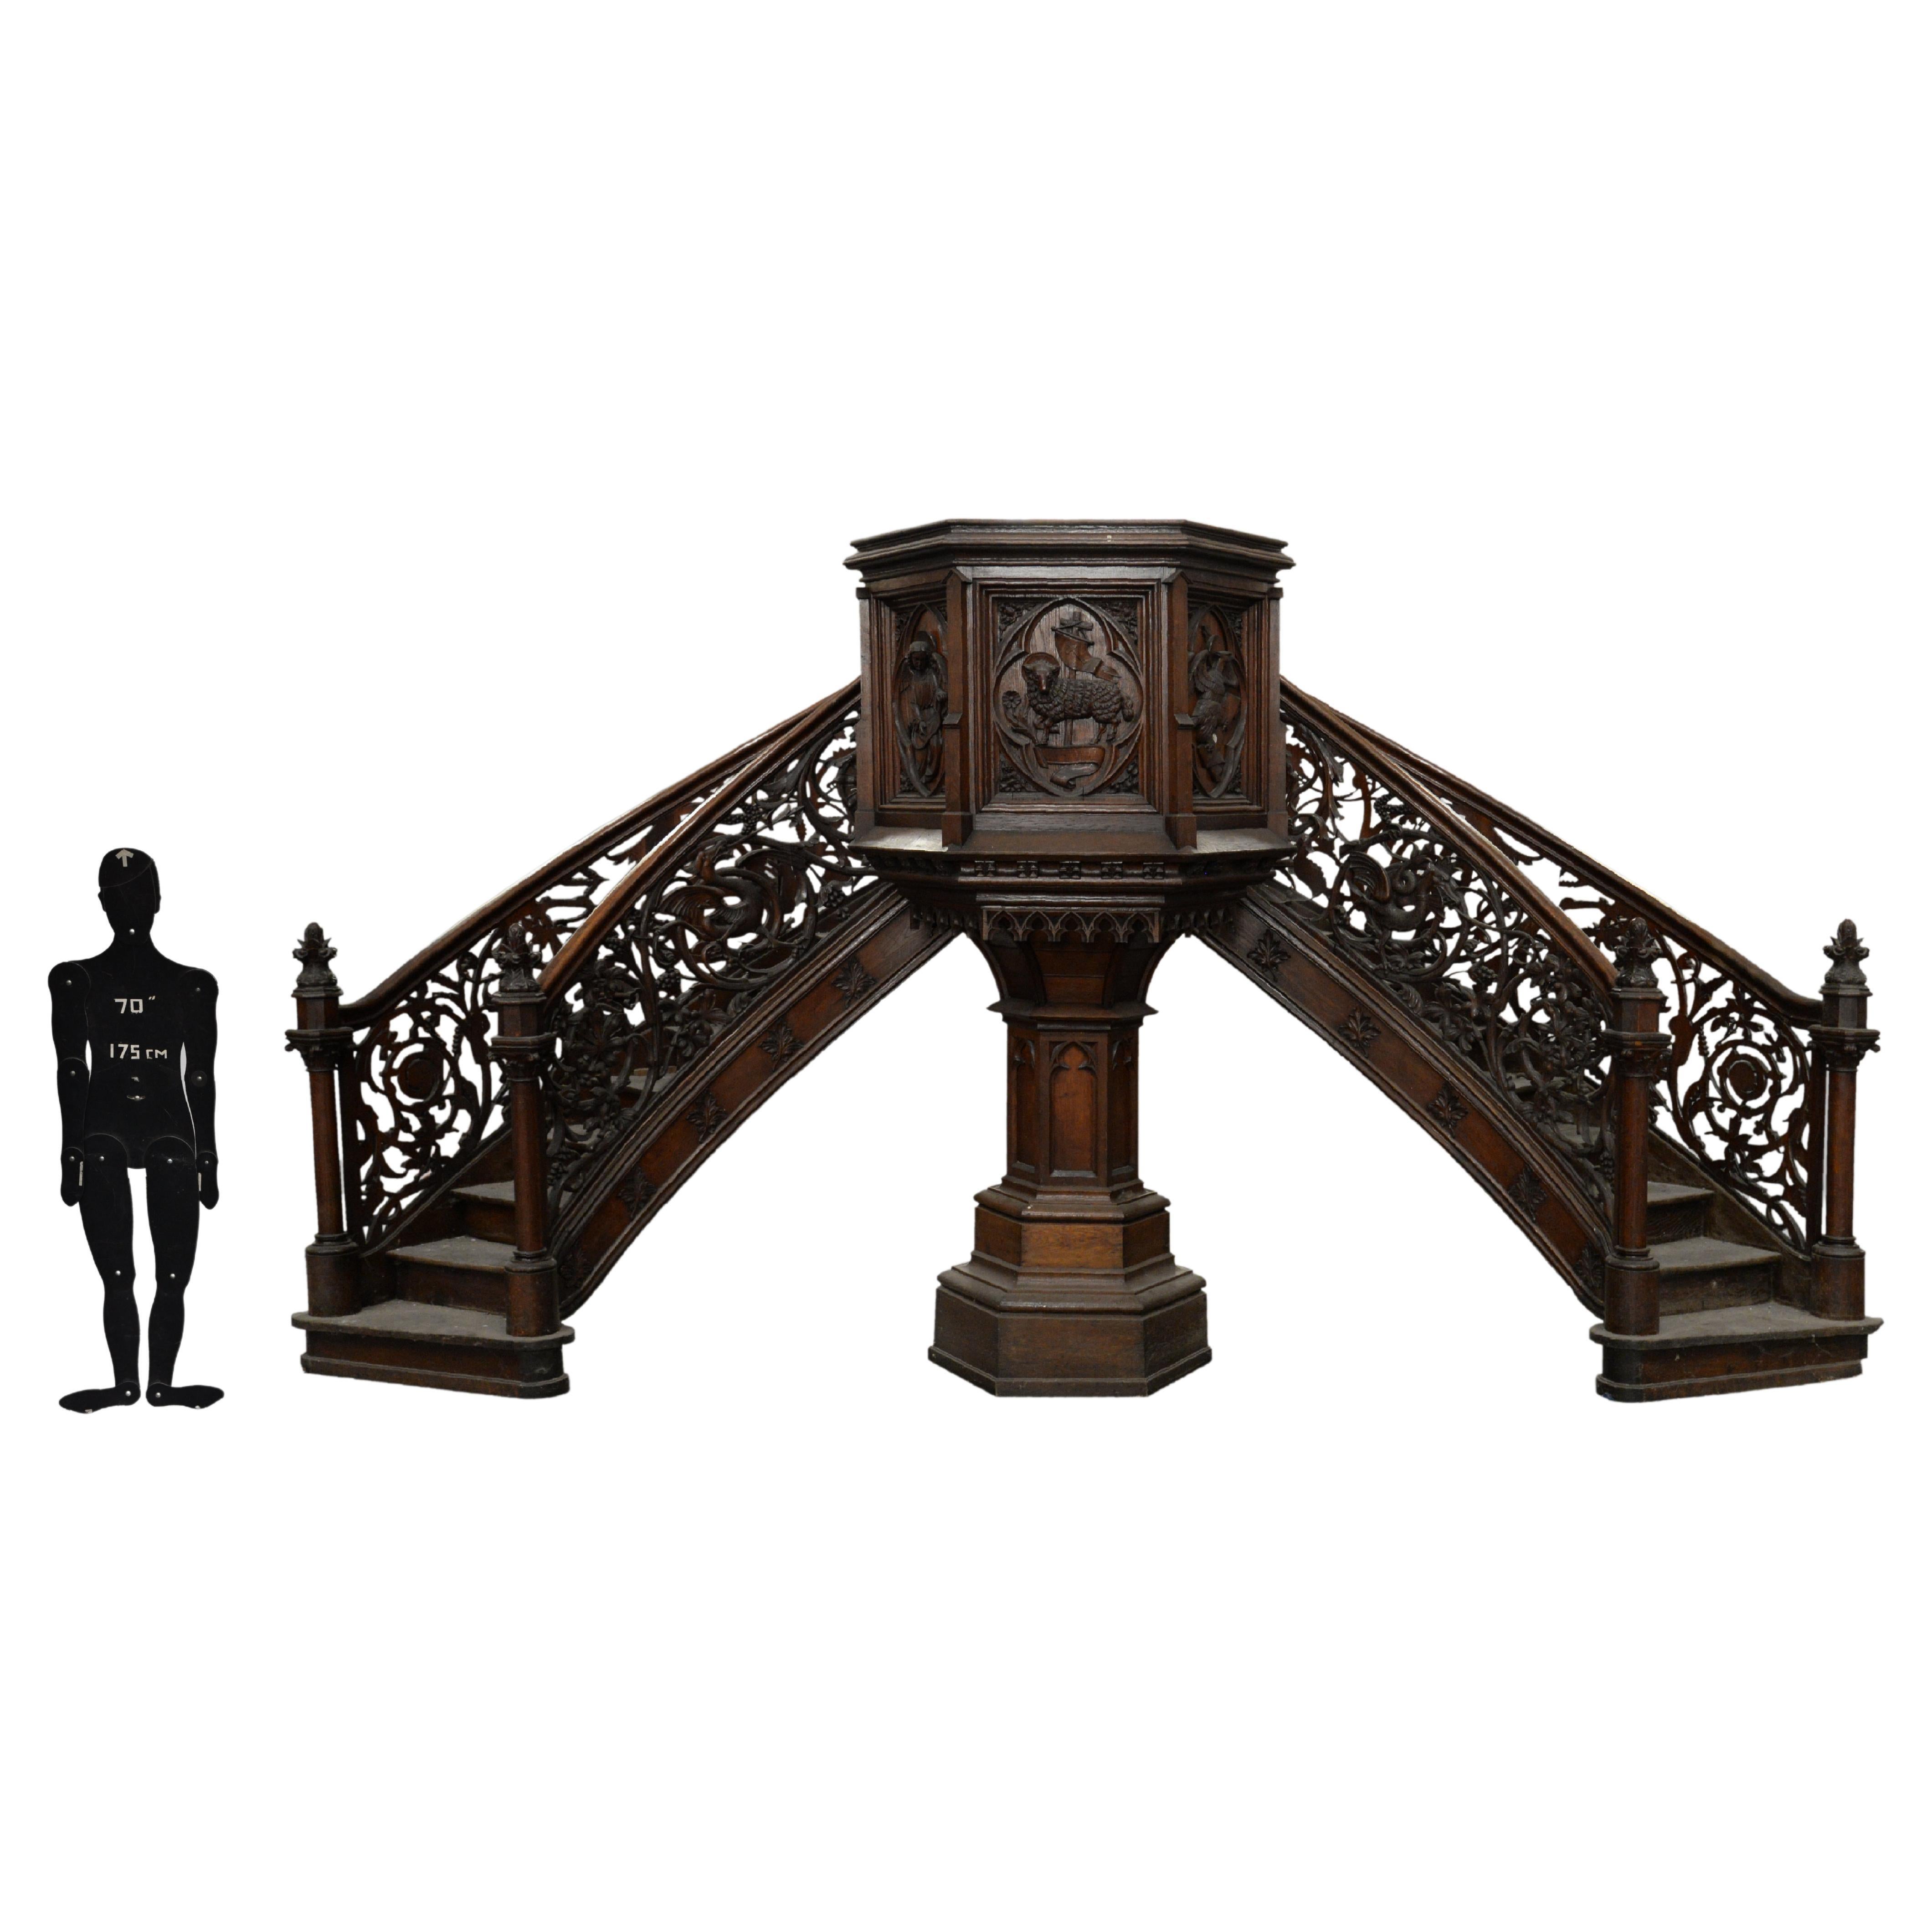 Neo-Gothic style preaching pulpit in oak For Sale